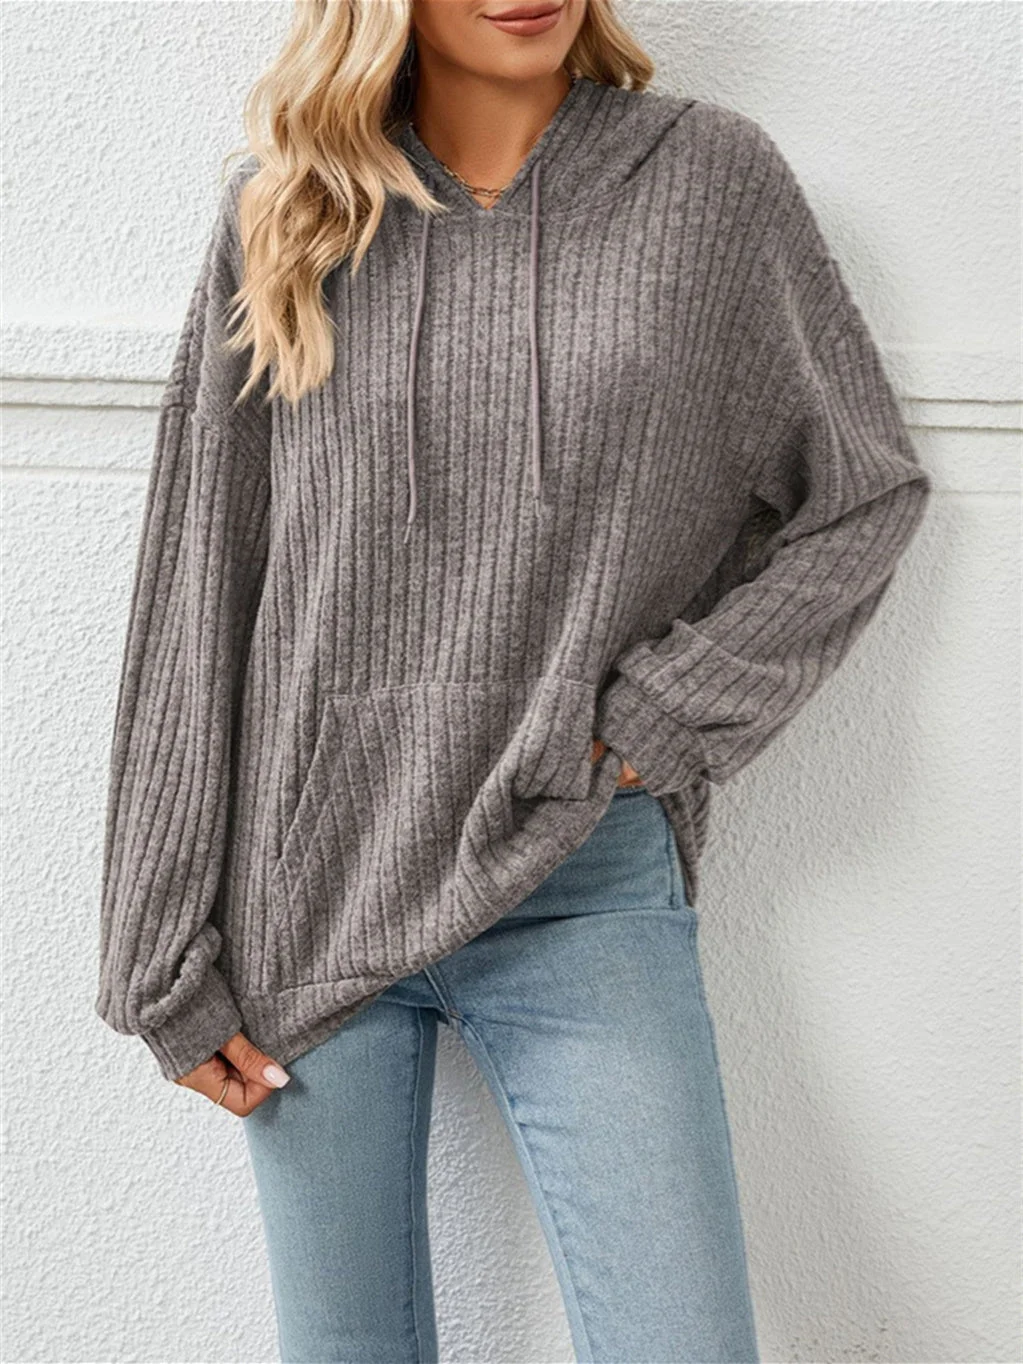 Women plus size clothing Women's Pocket Solid Color Stitching V-neck Long Sleeve Sweater Top-Nordswear